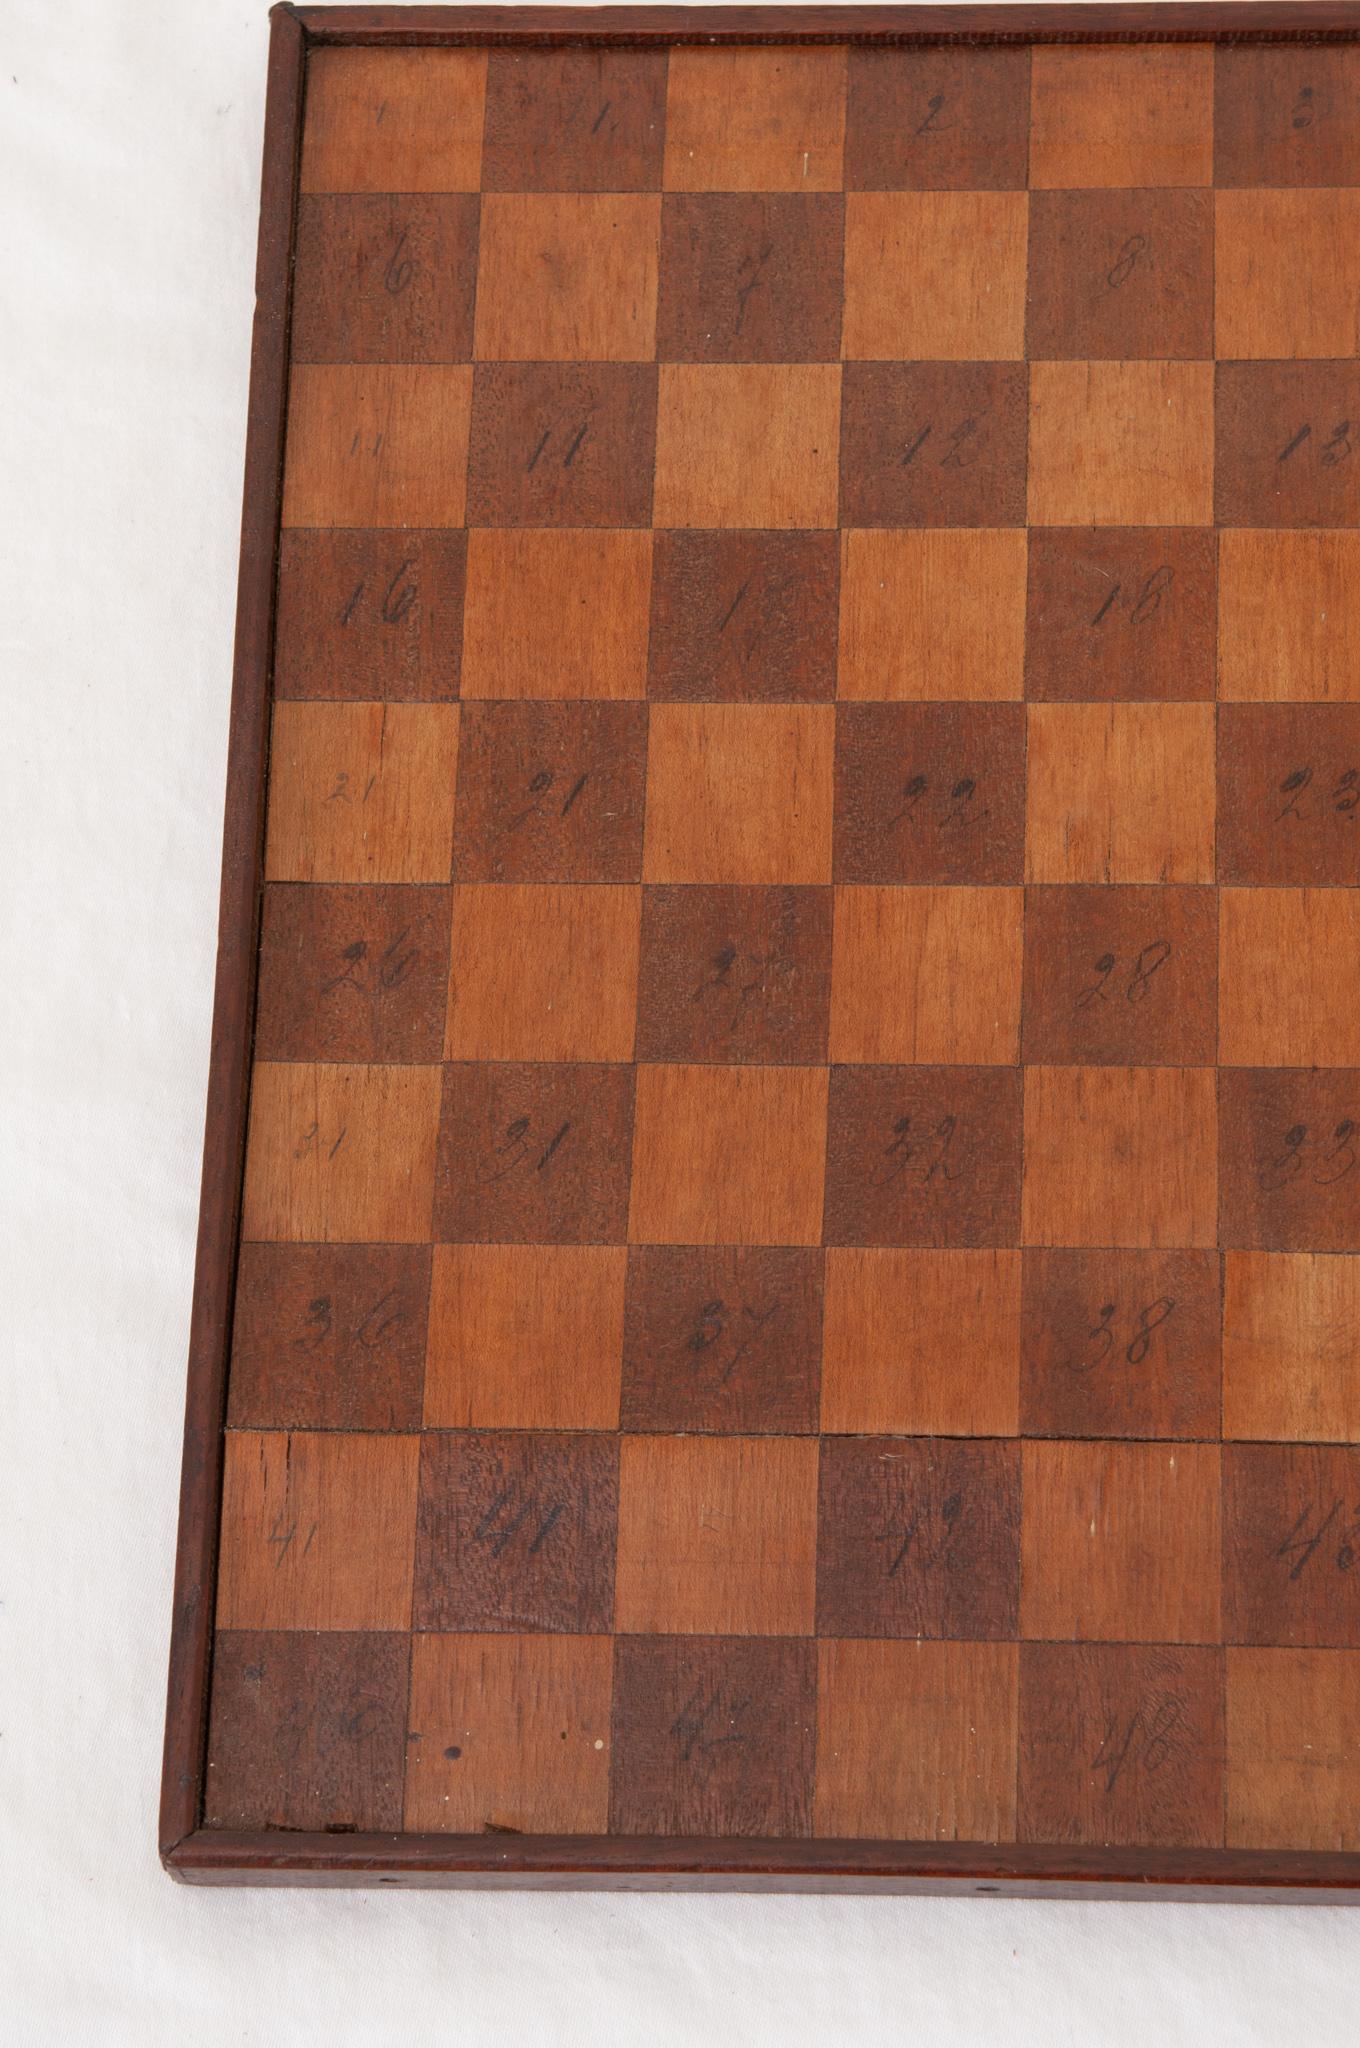 Other Wooden 10 x 10 CheckerBoard